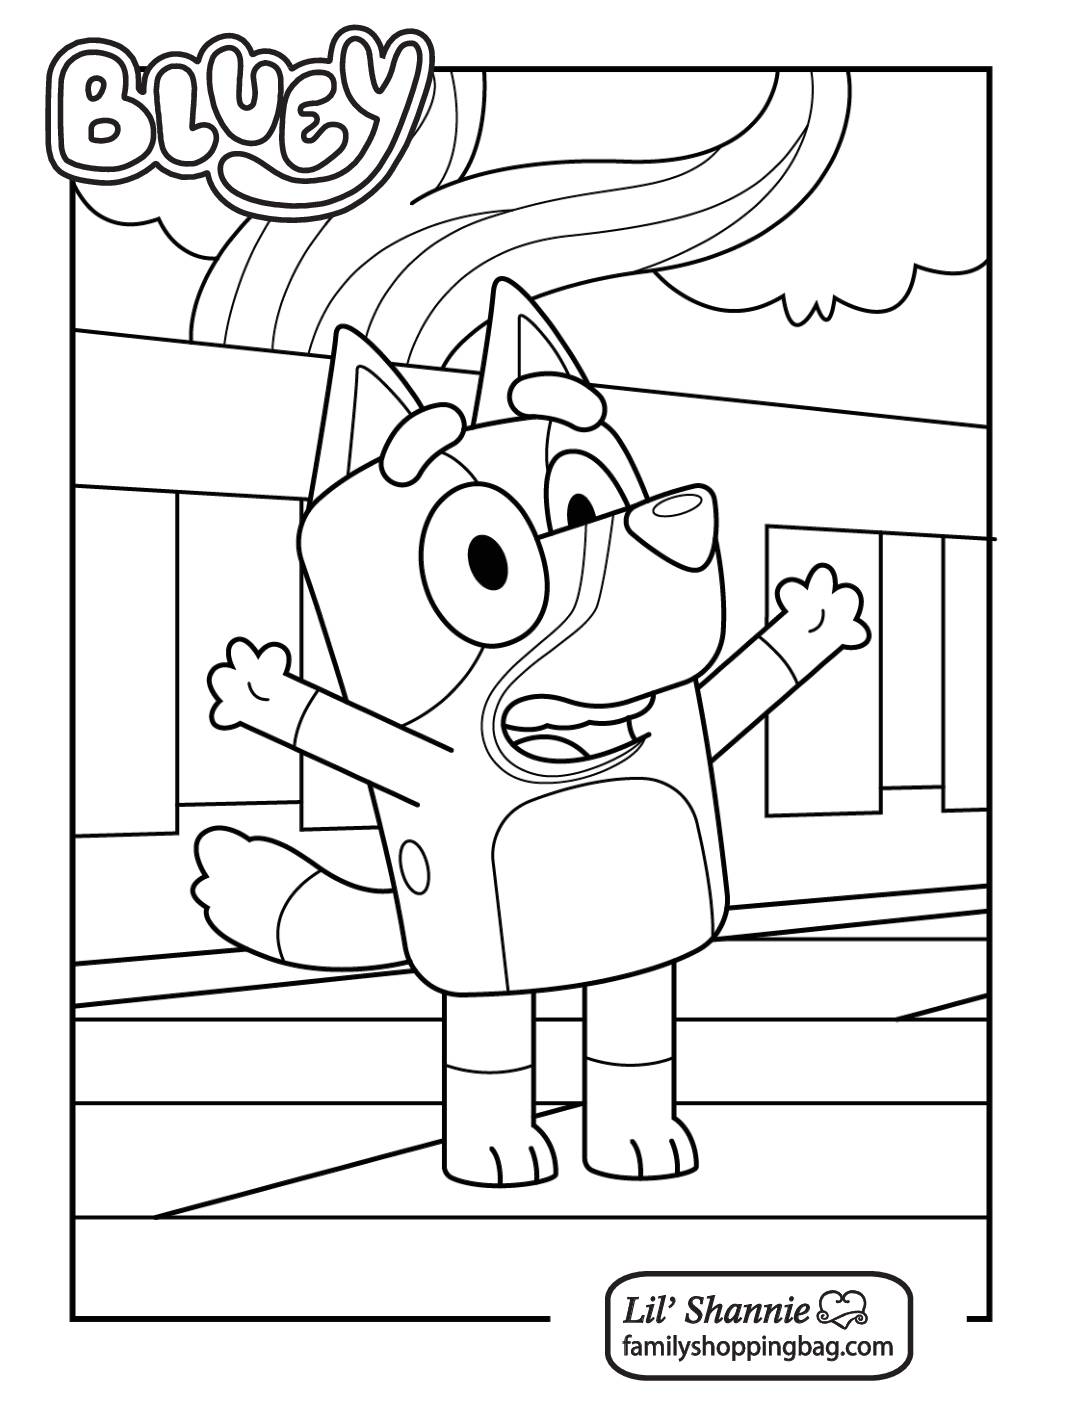 Coloring Page 2 Bluey Coloring Pages